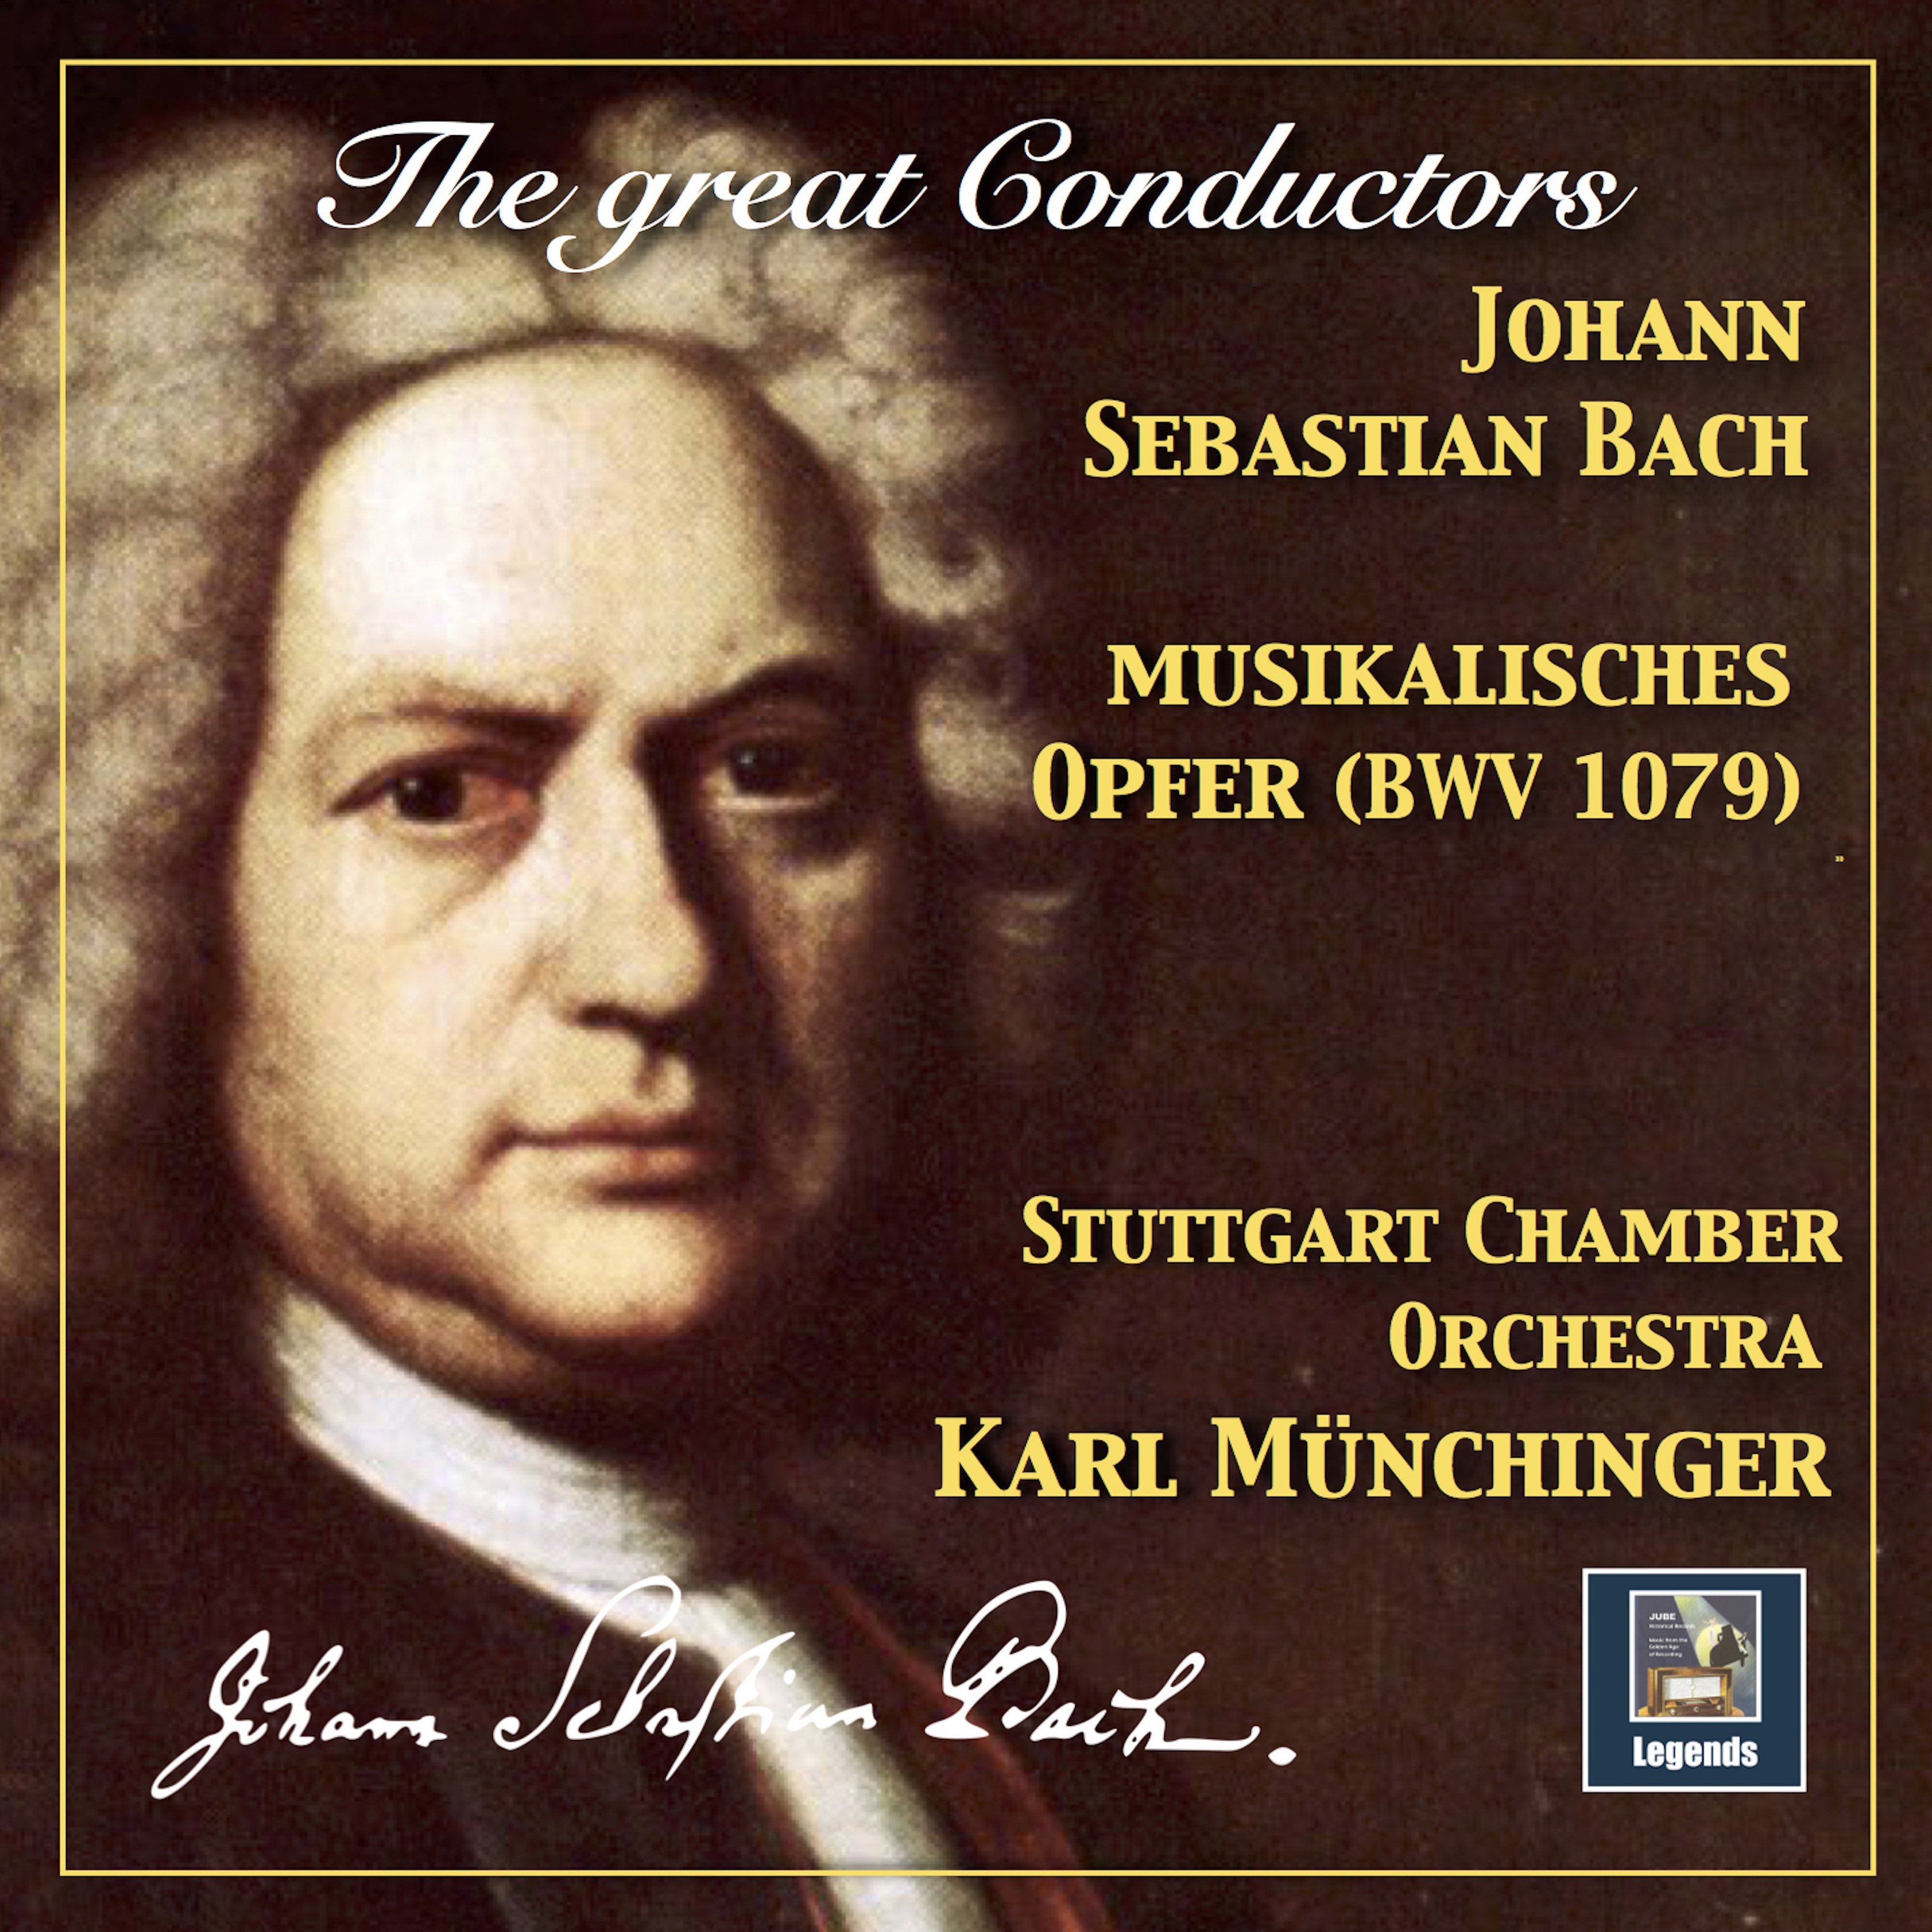 Musikalisches Opfer, BWV 1079 Arr. K. Mü nchinger for Chamber Orchestra: Canon a 2 per augmentationem, contrario motu